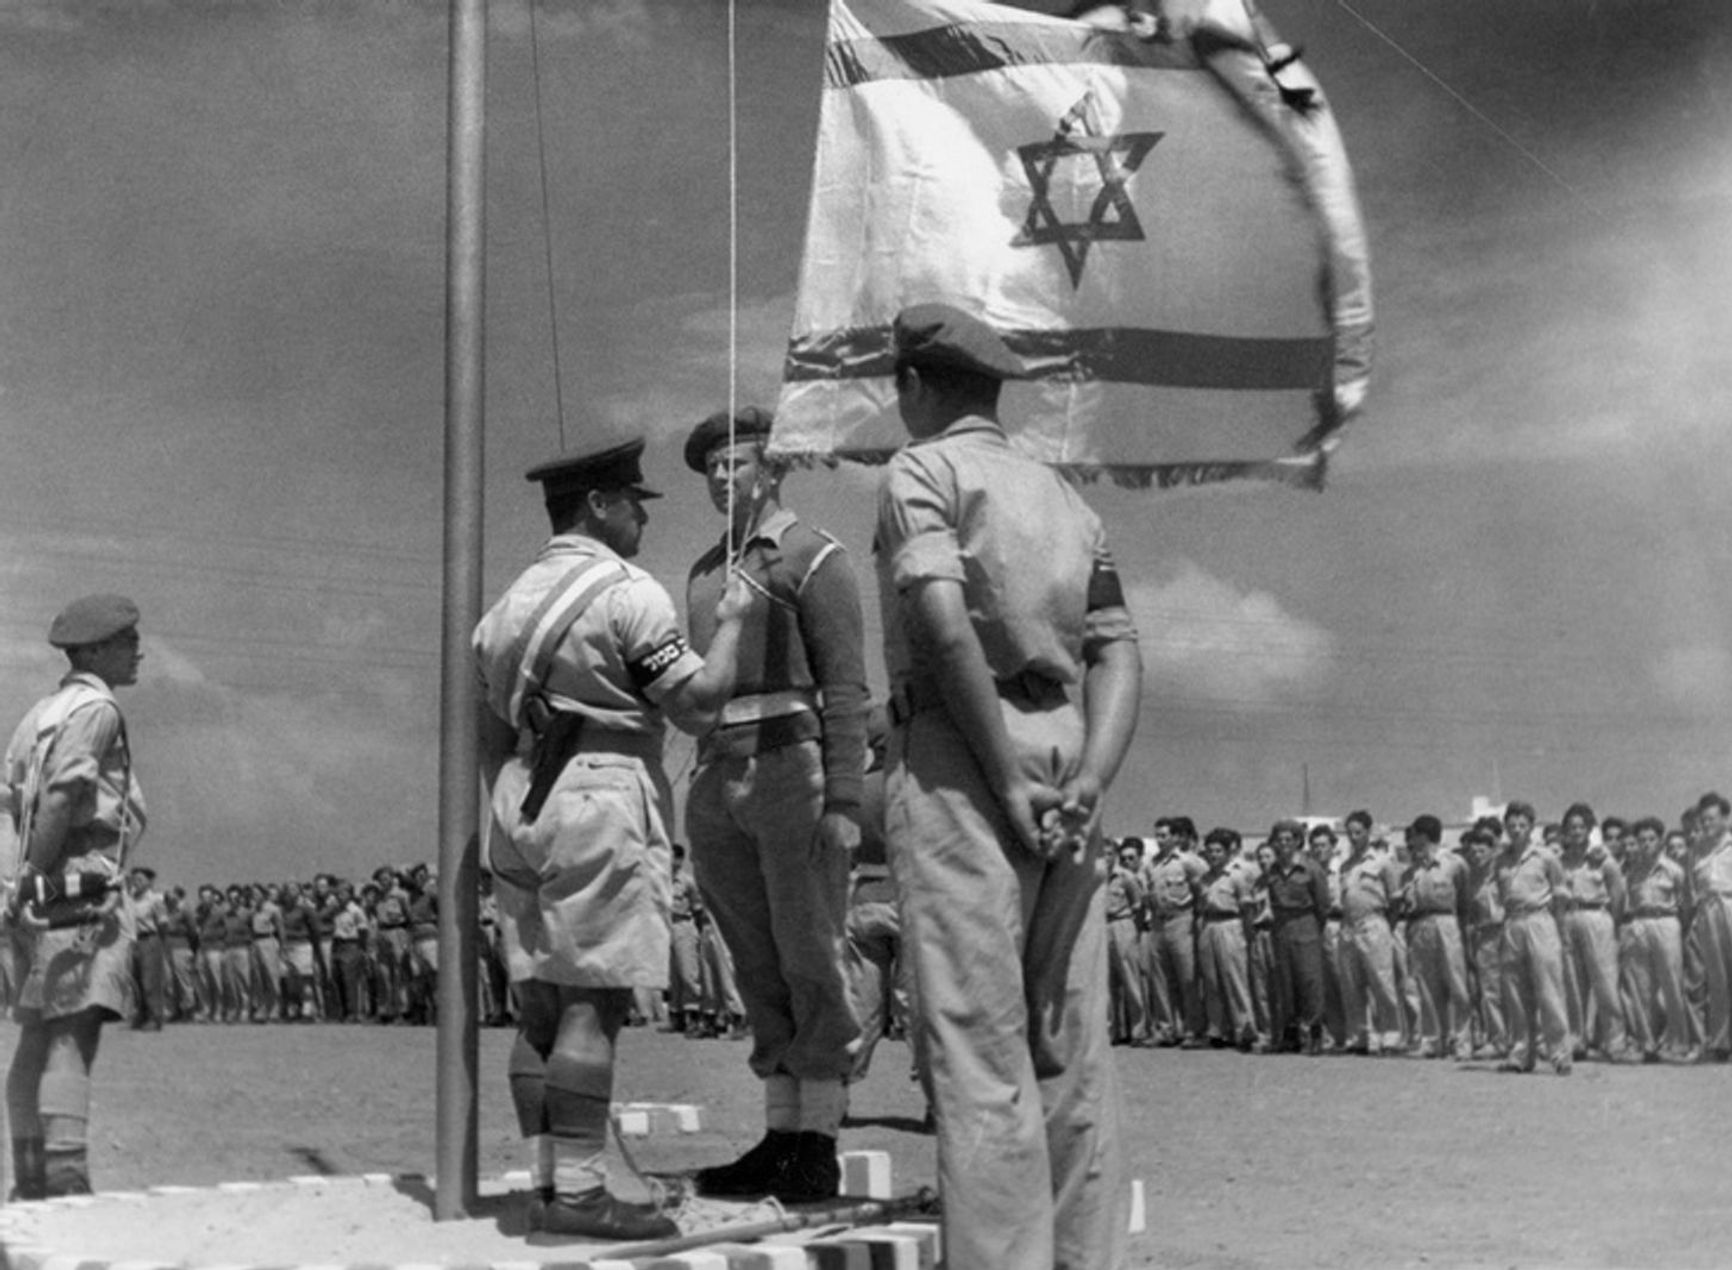 An Israeli officer raises the national flag for the first time on June 8, 1948